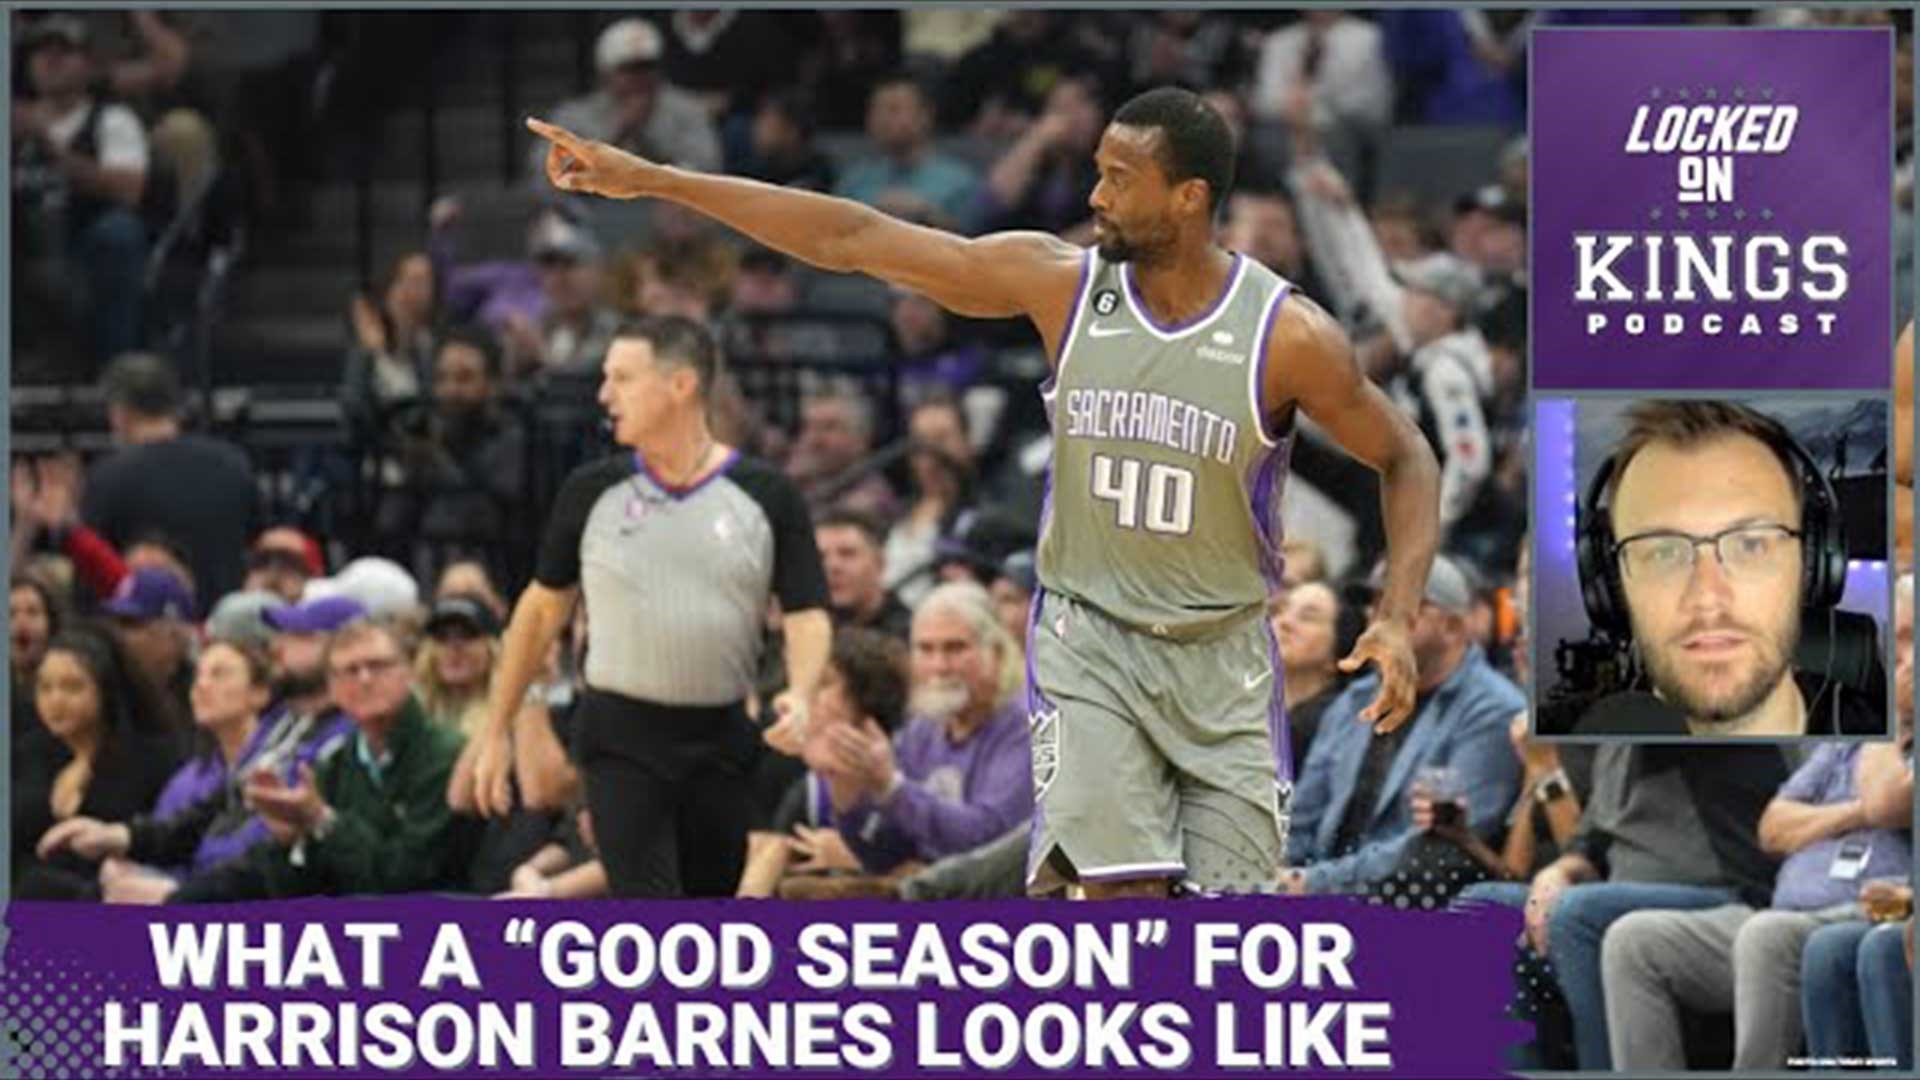 Matt George shares what he believes Harrison Barnes needs to do this year for it to be considered a good season for Sacramento.